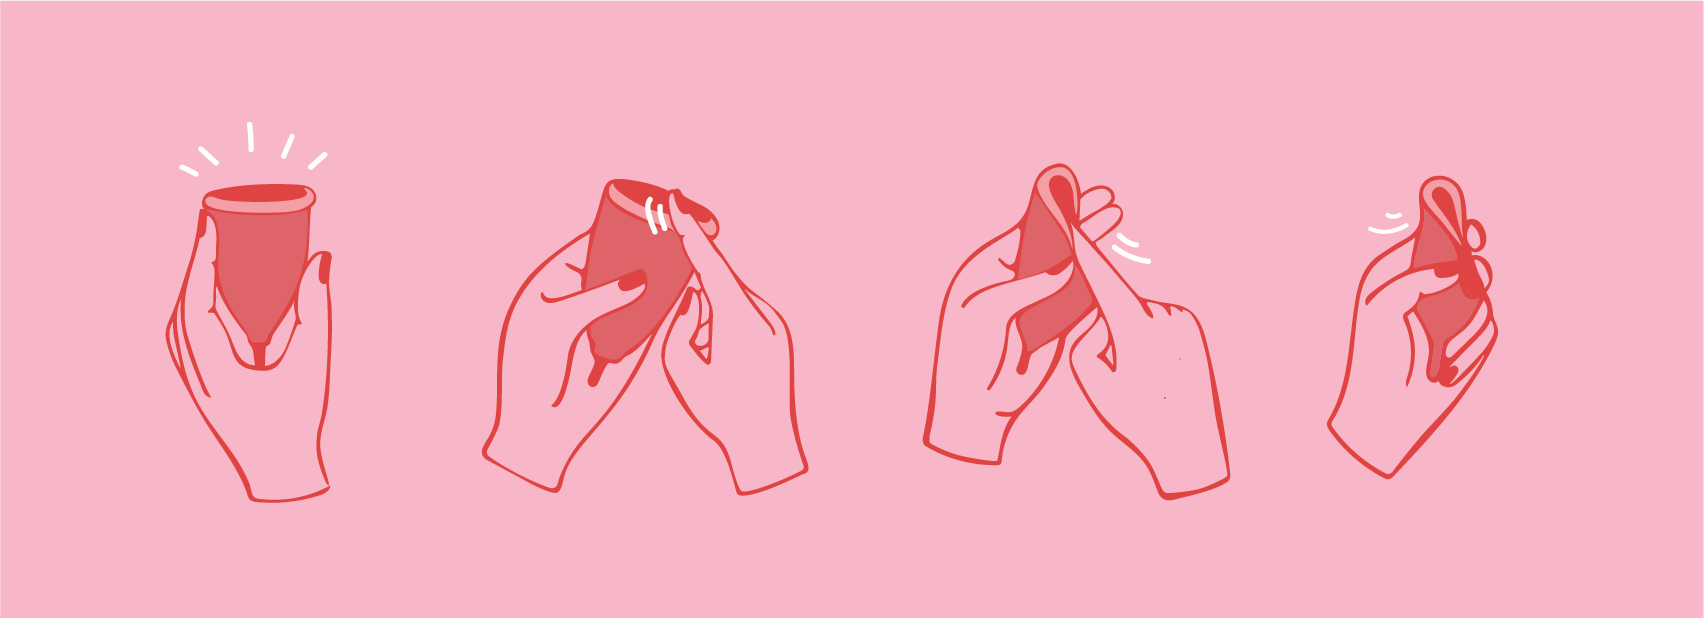 Menstrual Cup punch-down fold